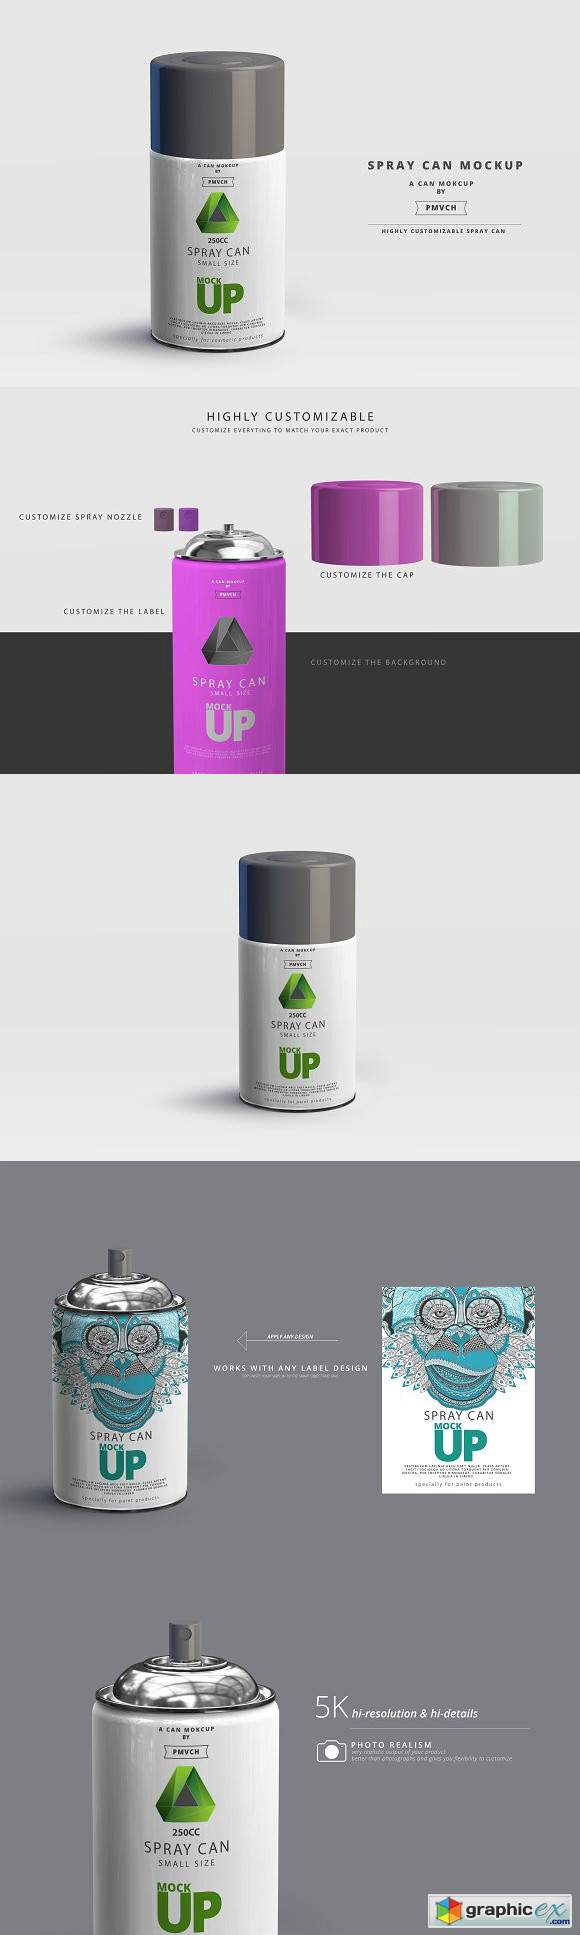 Spray Can Mockup - Small Size =